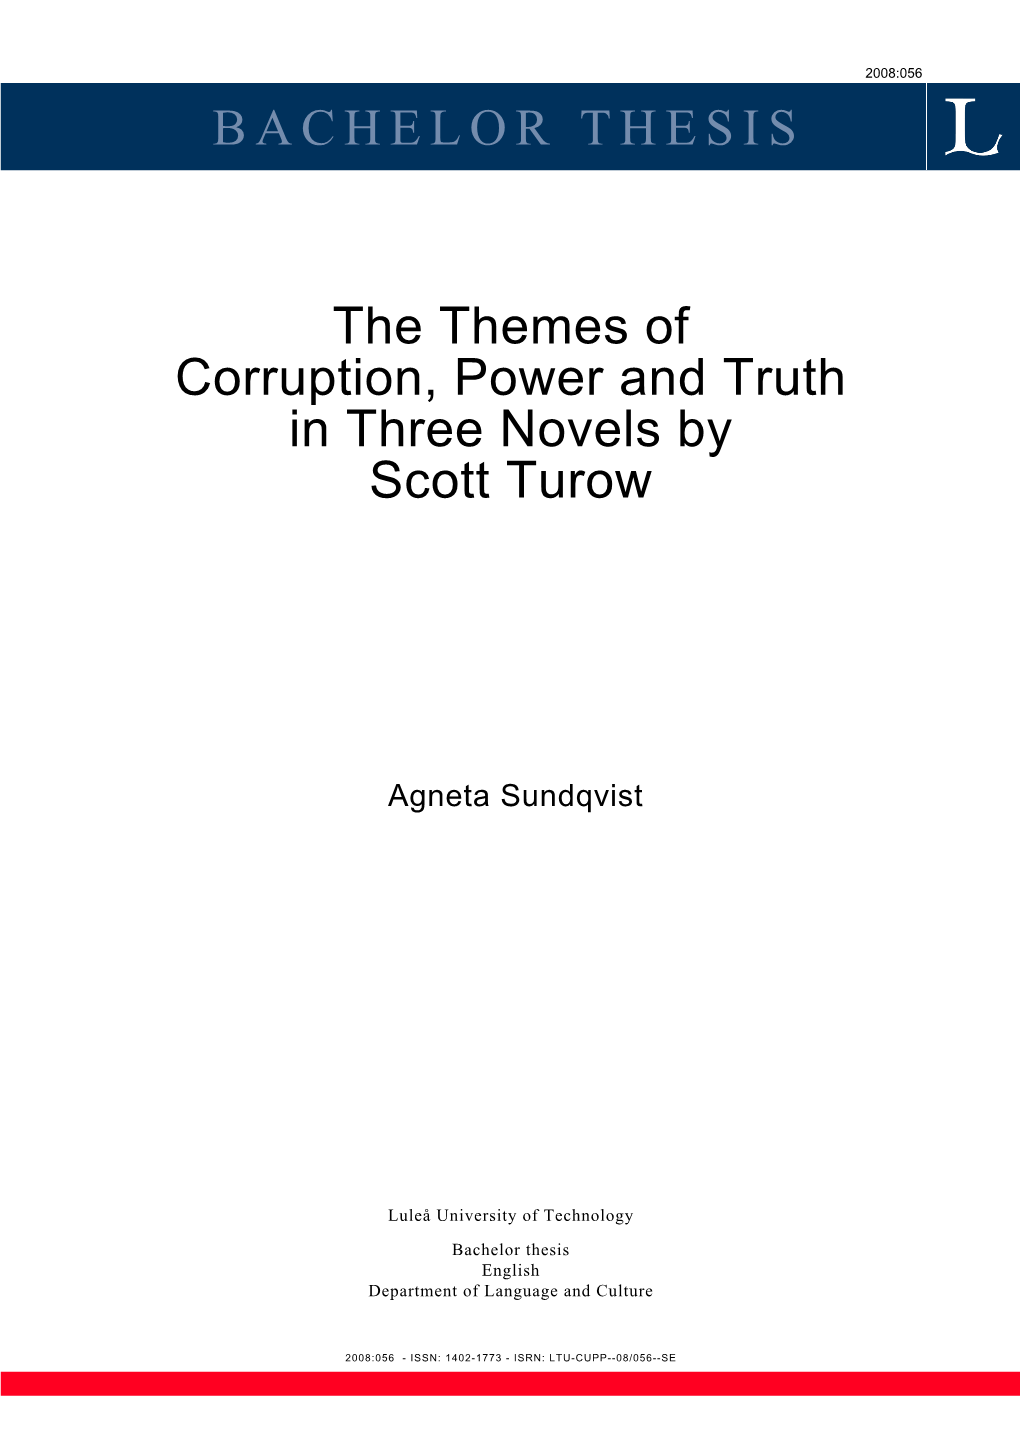 BACHELOR THESIS the Themes of Corruption, Power and Truth In